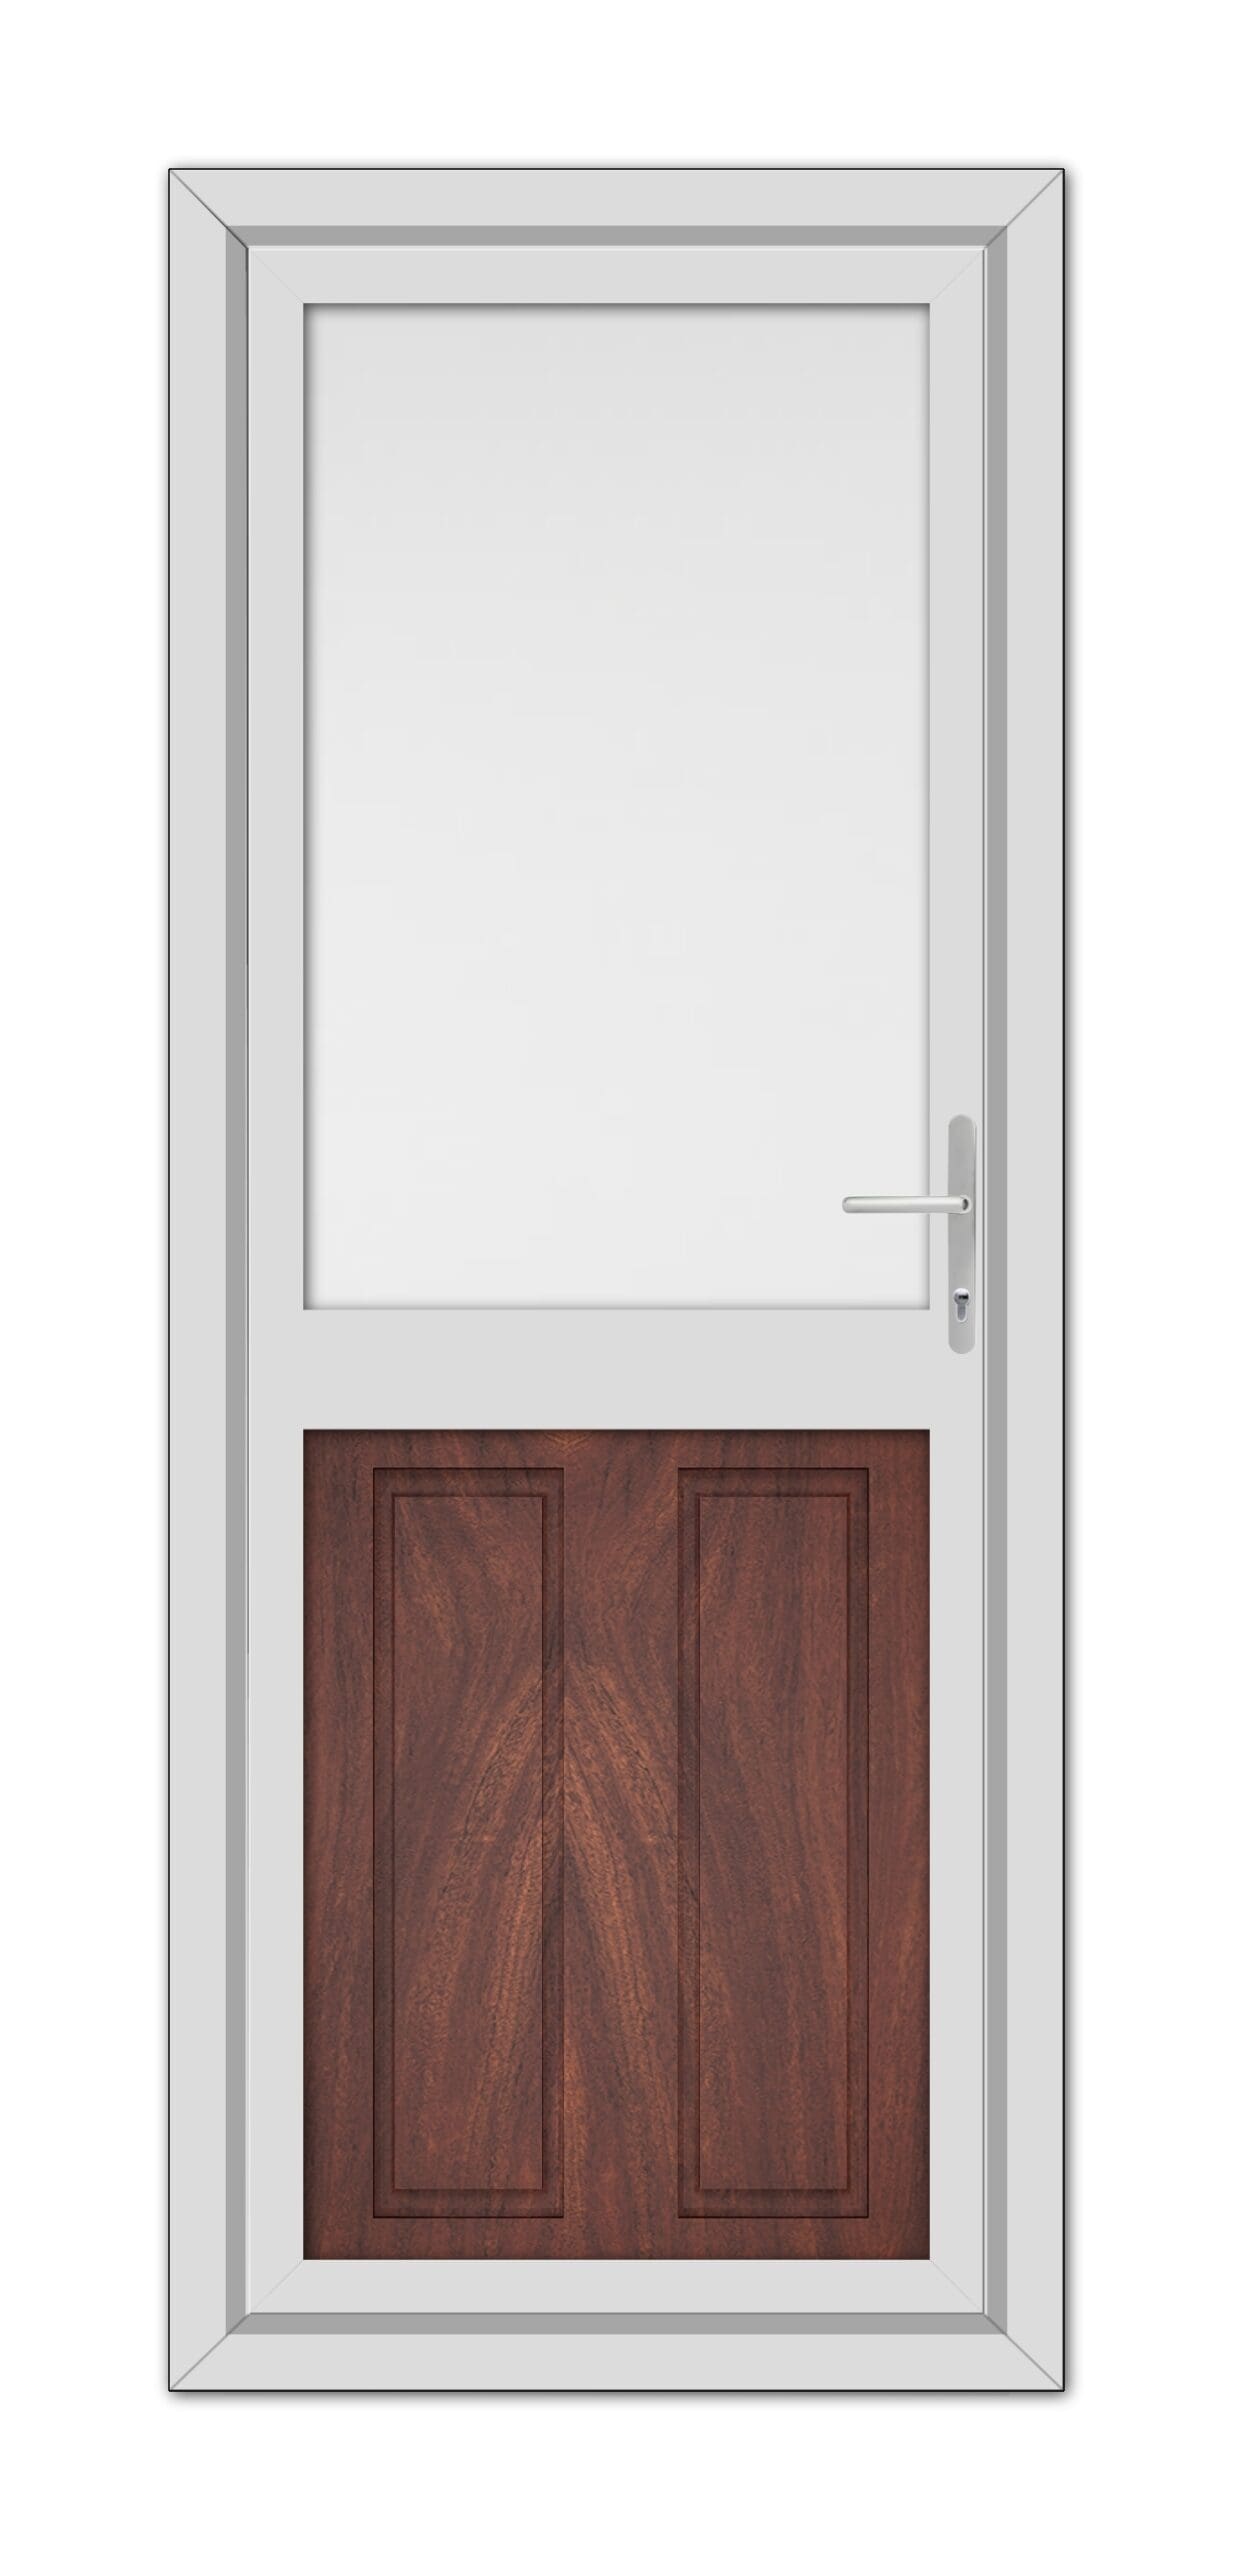 A modern Rosewood Manor Half uPVC Back Door with a large glass panel at the top and dark wood panels at the bottom, featuring a metallic handle on the right side.